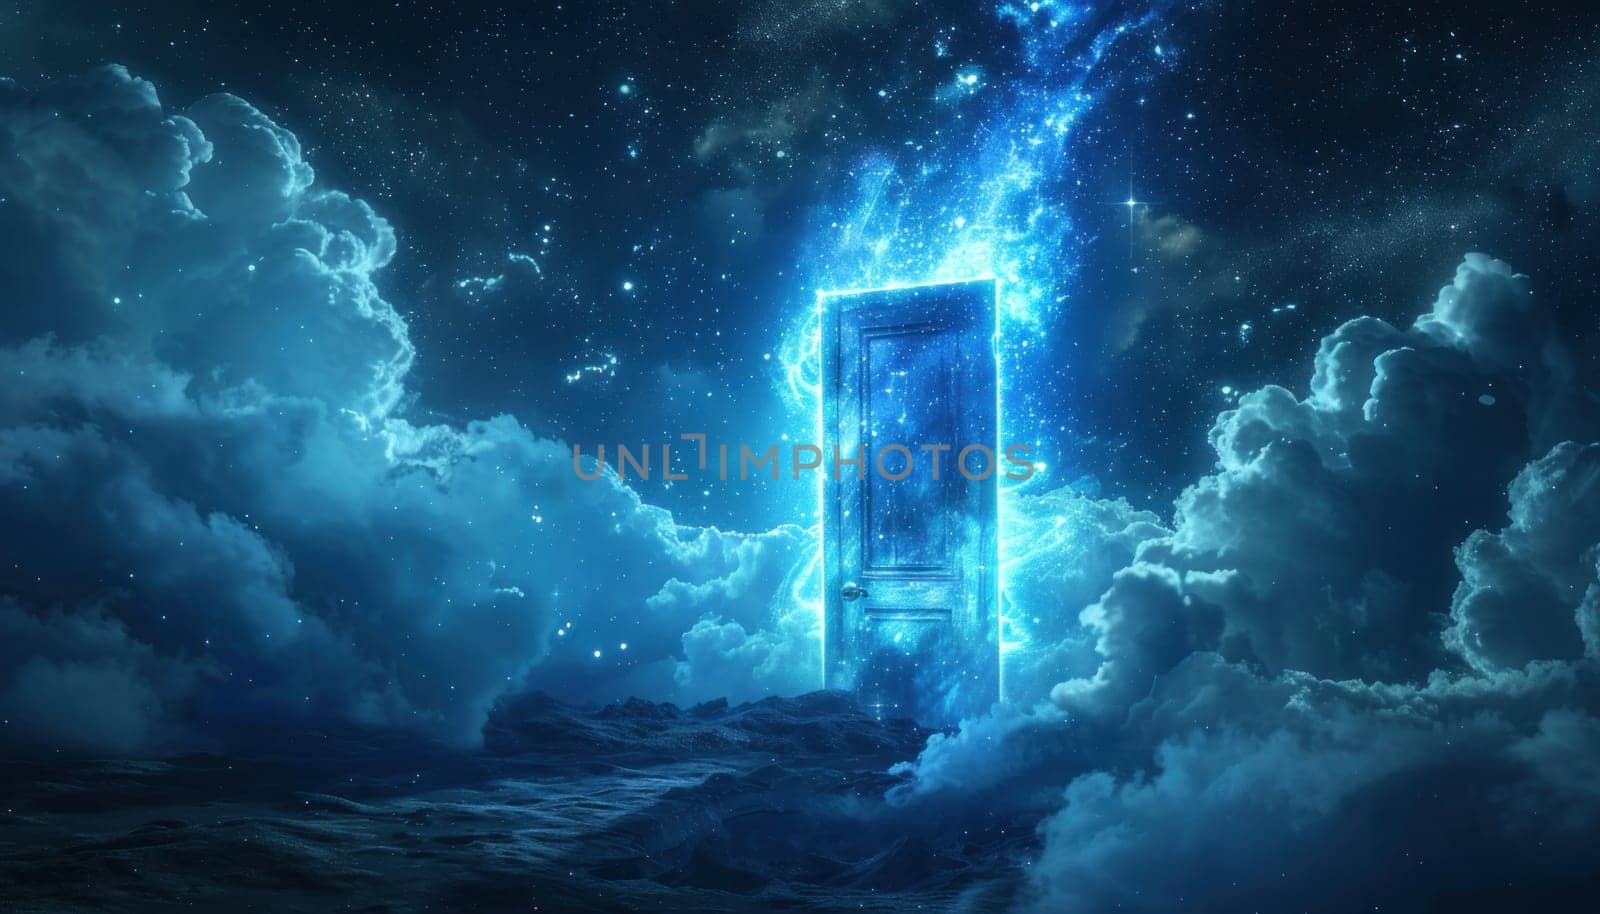 A blue door is shown in the sky with clouds and stars by golfmerrymaker